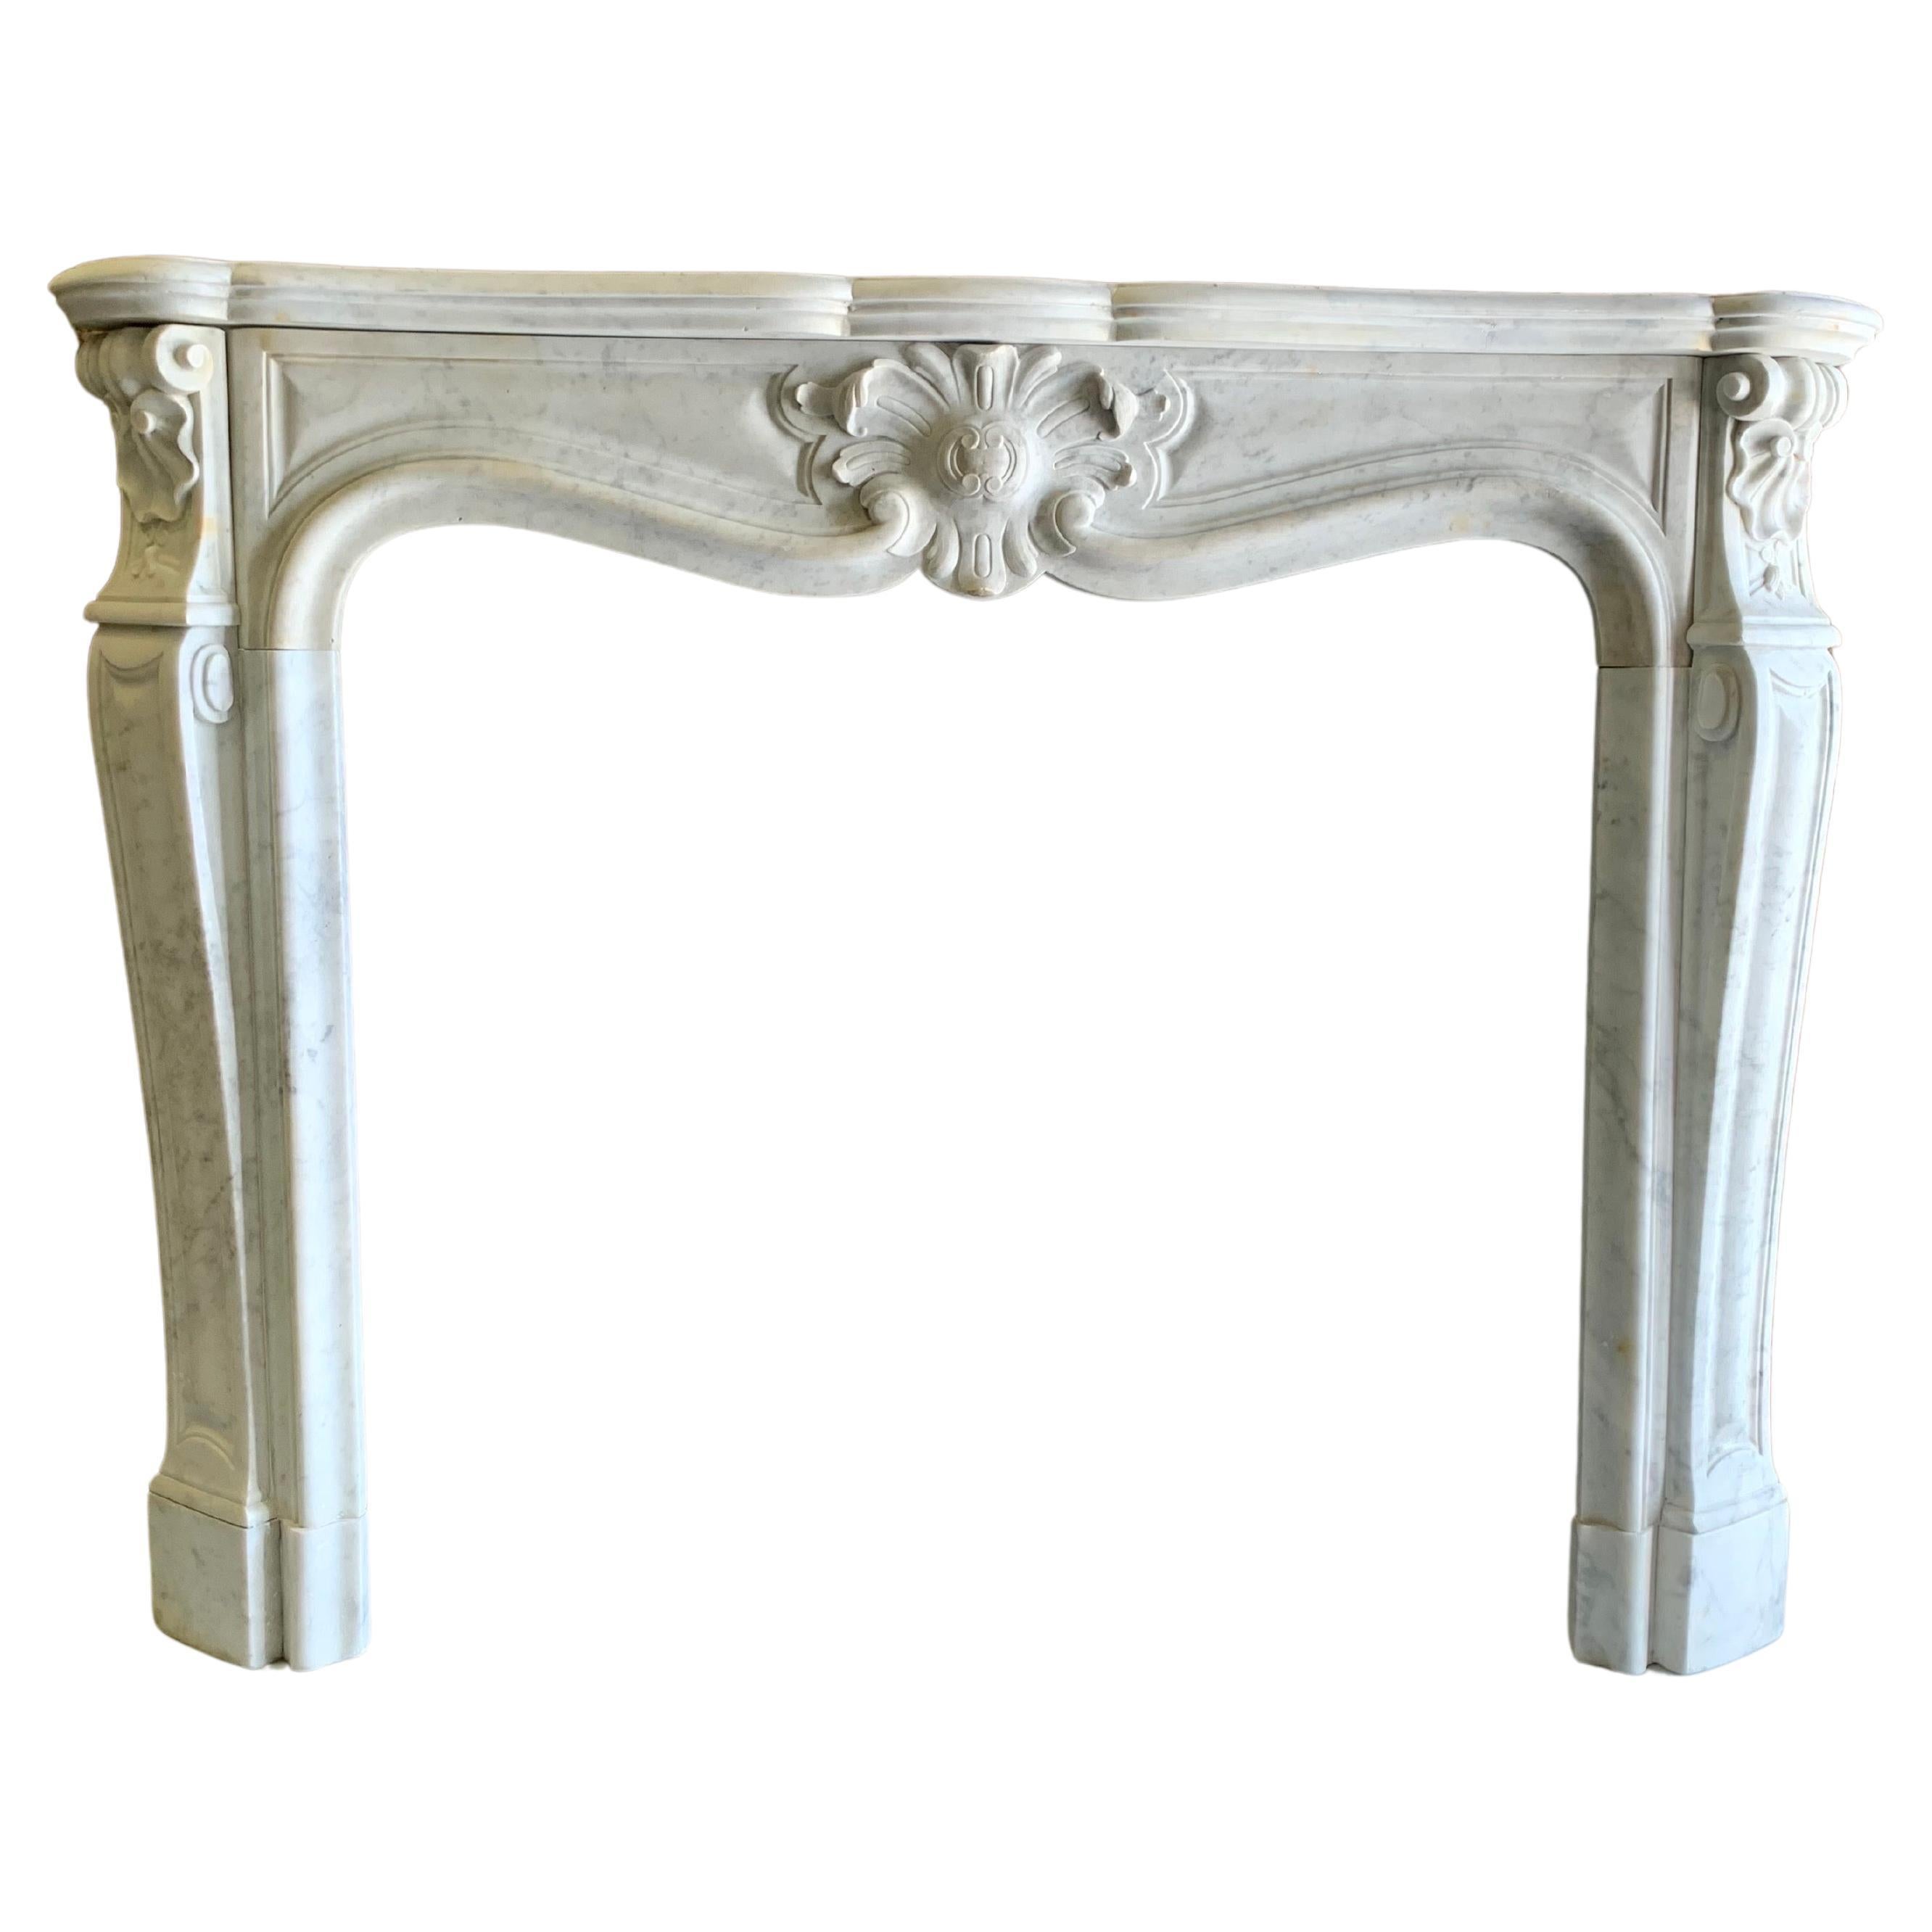 18th Century Louis XVI marble fireplace mantlepiece.
This beautiful Antique fireplace is hand carved from white italian statuary mable with detailed panelling to both Jambs & Centre Frieze. In addition to the fine carved undercut relief to its